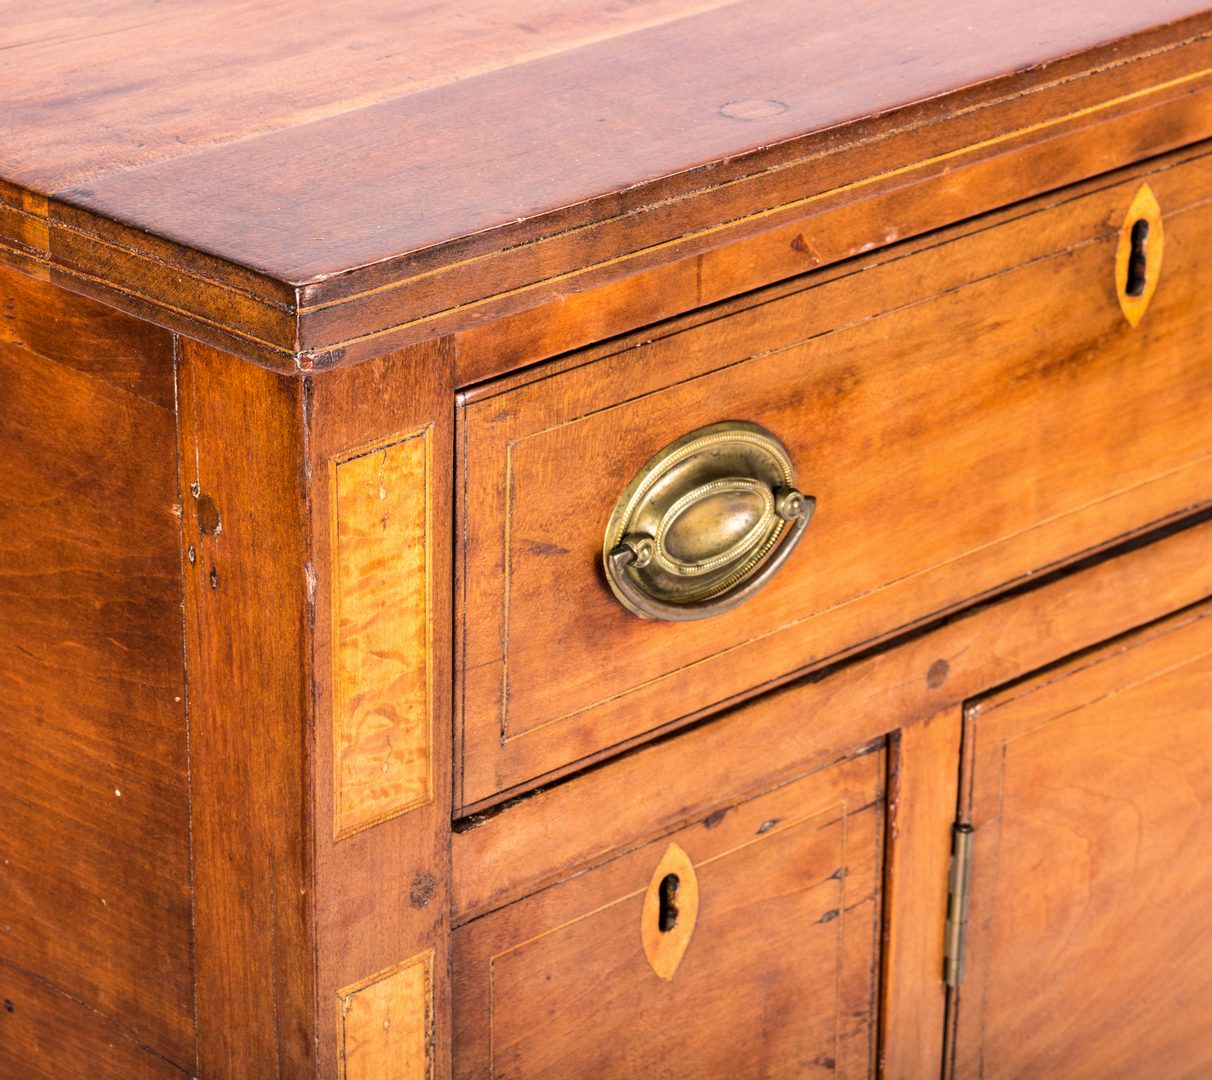 Lot 631: Southern Federal Inlaid Cherry Sideboard